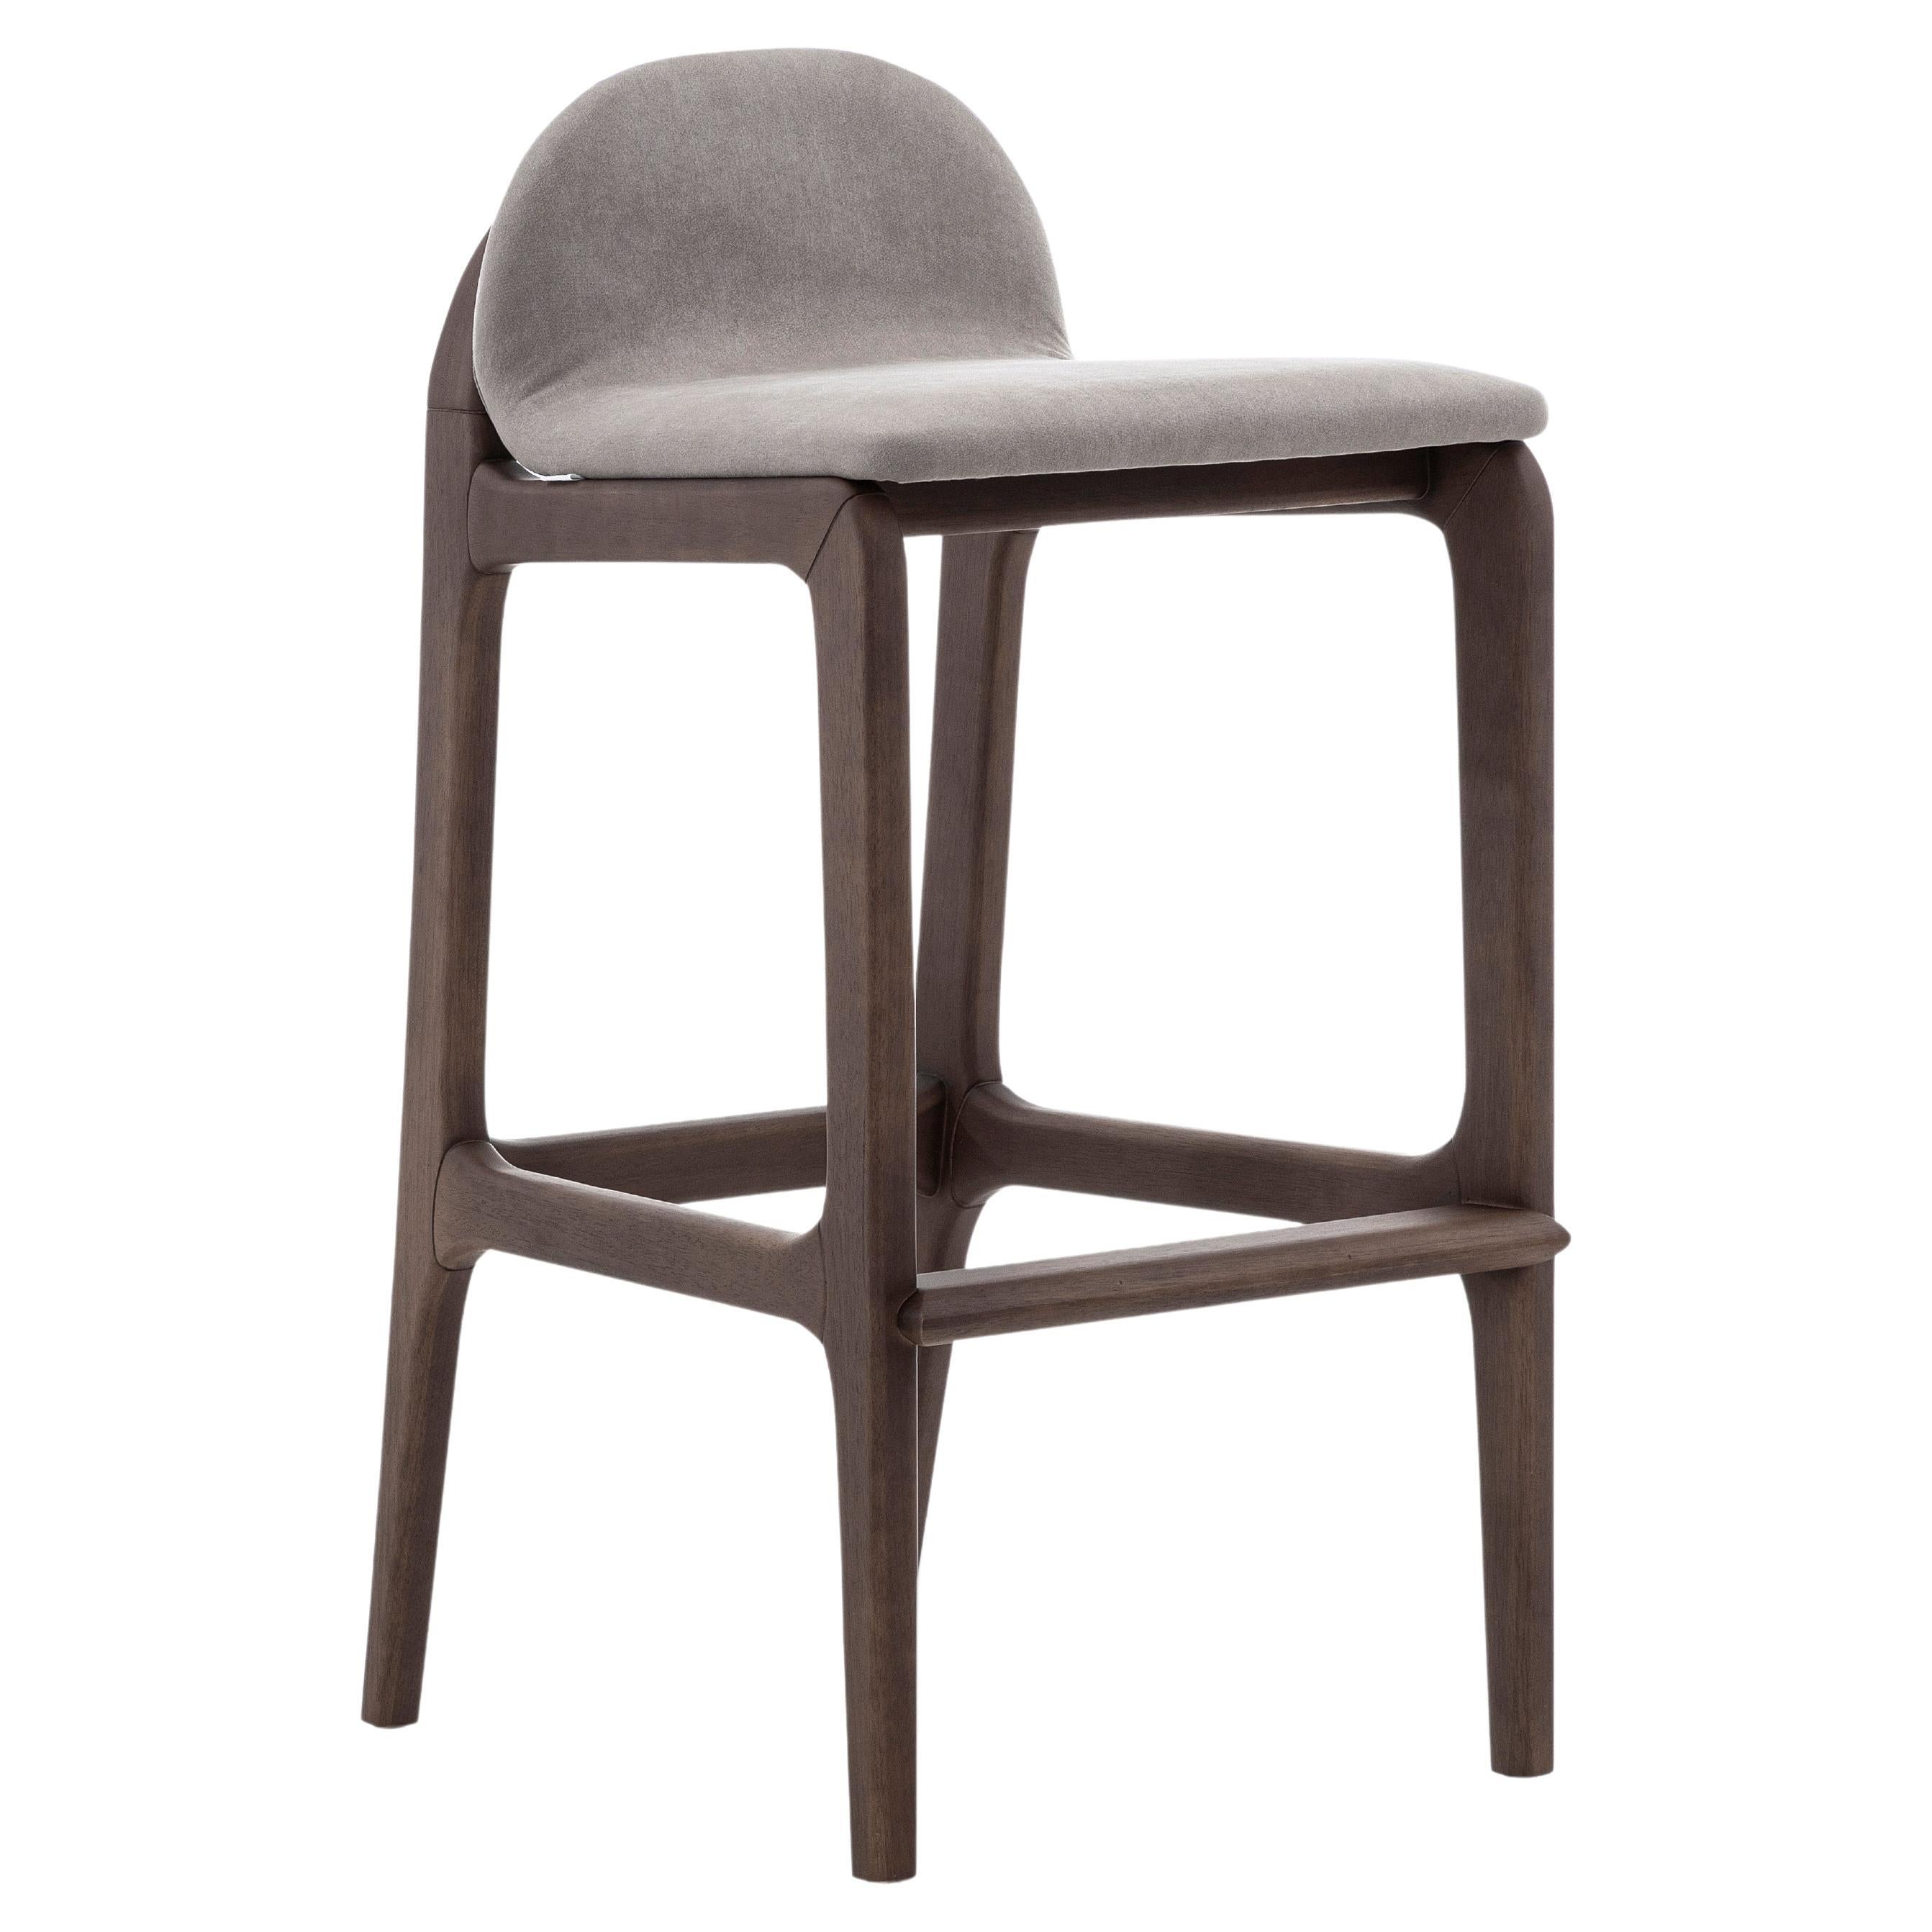 Ura Counter Barstool in Walnut Wood Finish Base and Upholstered Light Brown Seat For Sale